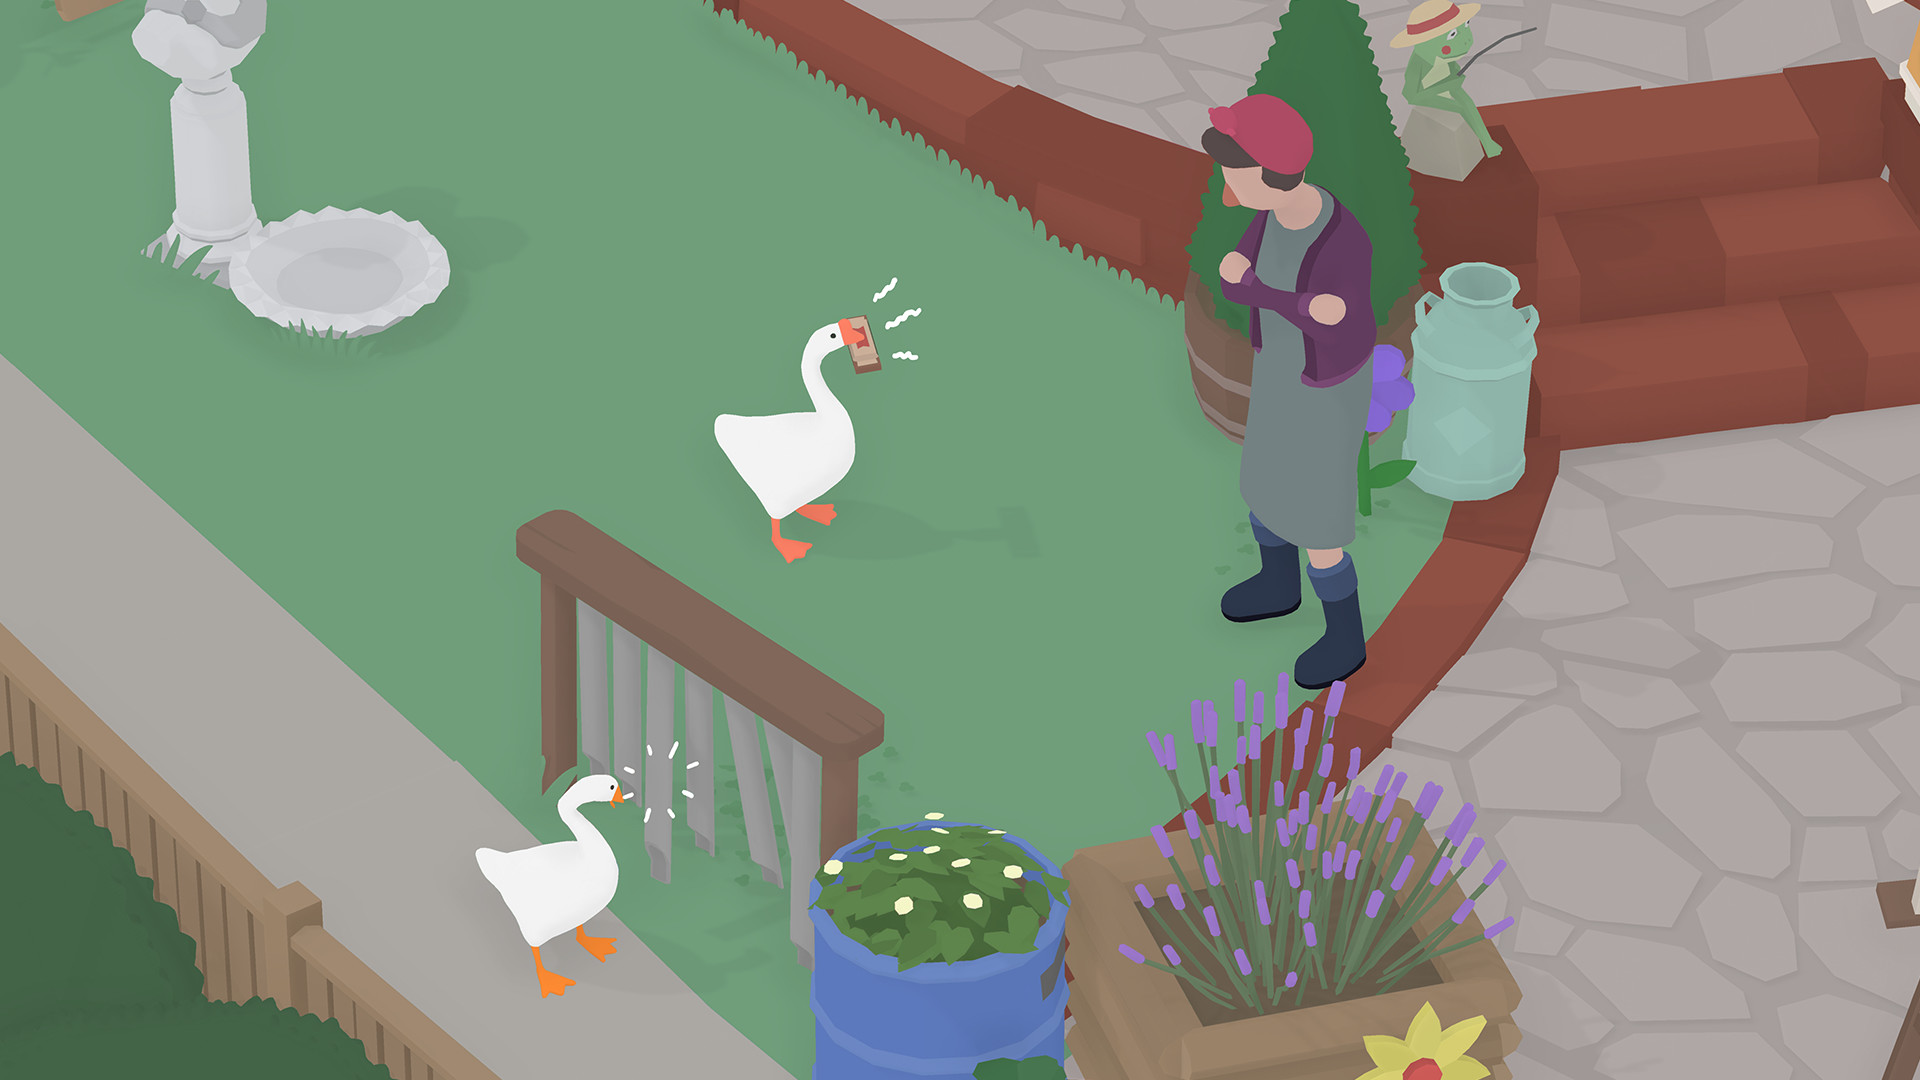 untitled goose game download free